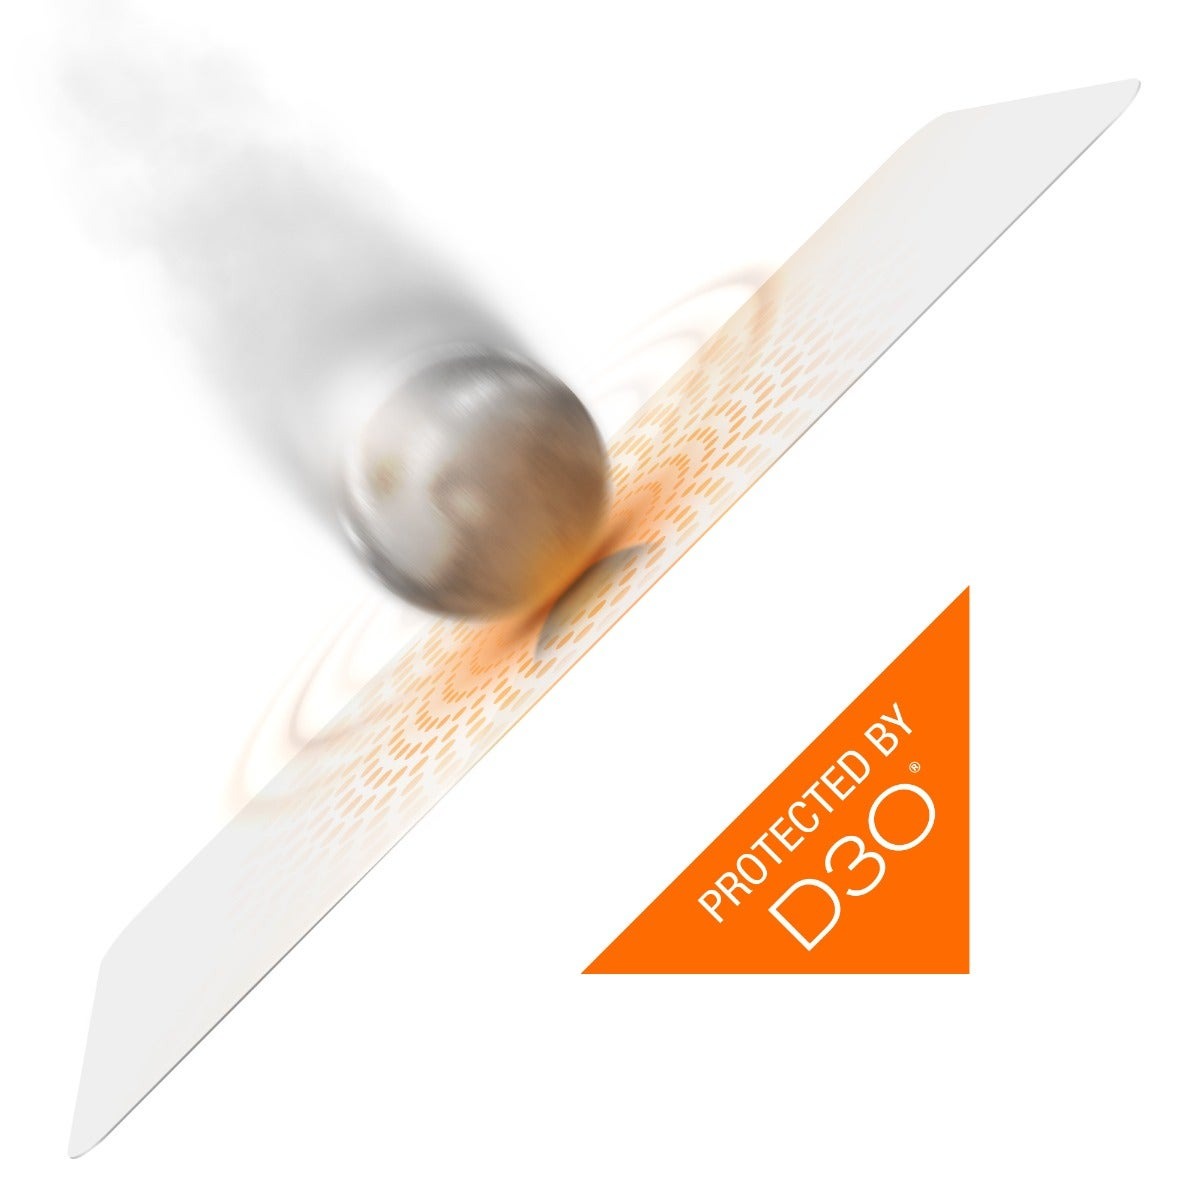 Extreme Shatter Protection with D3O® ||Our strongest glass screen protection is reinforced with D3O®, the thinnest, most advanced impact protection material.